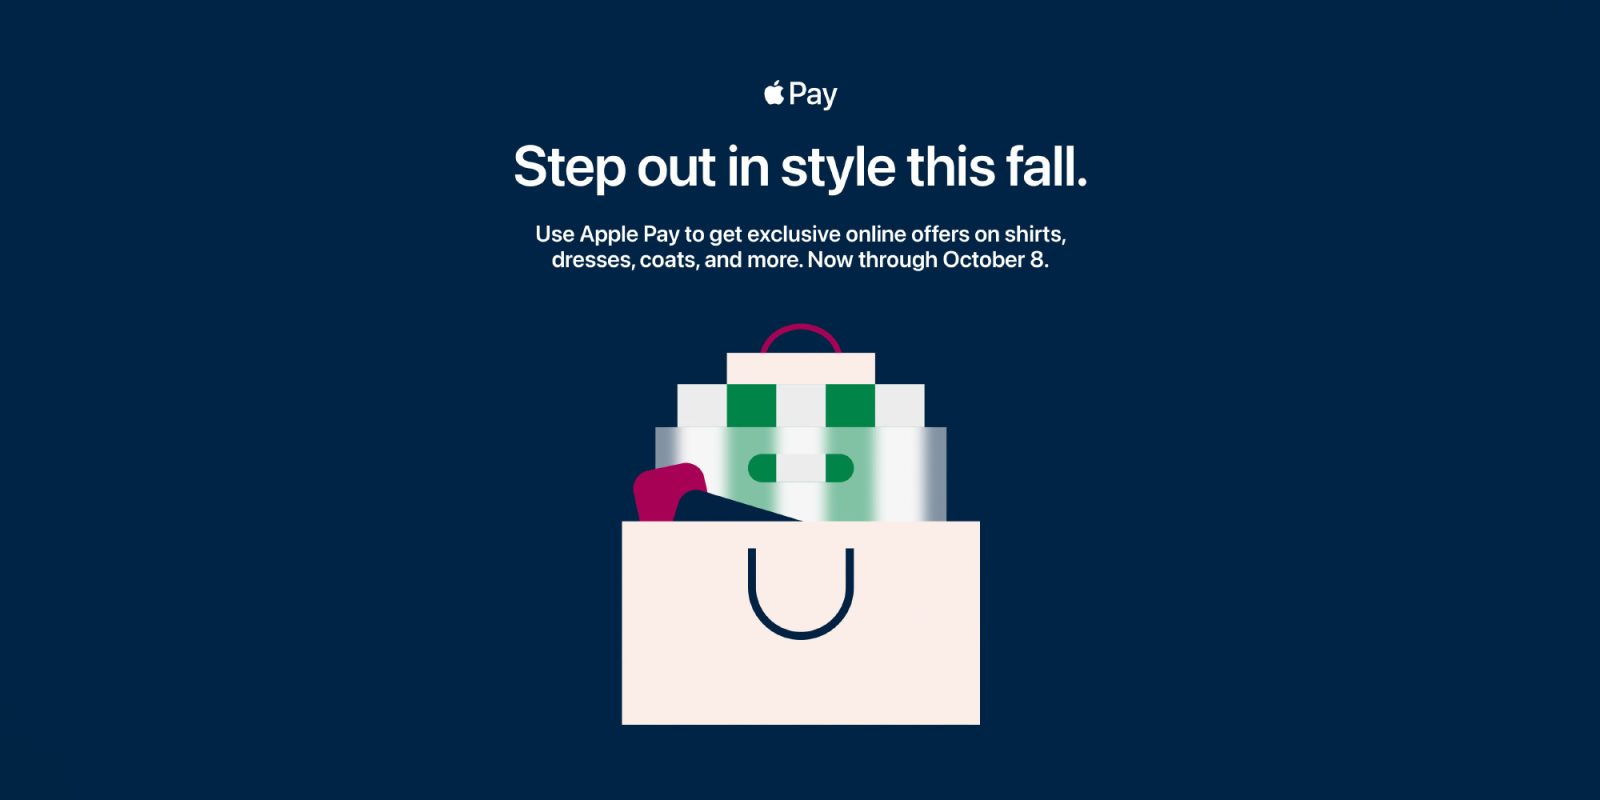 Apple Pay fall promo offers up to 15% off at Brooks Brothers, Madewell, more